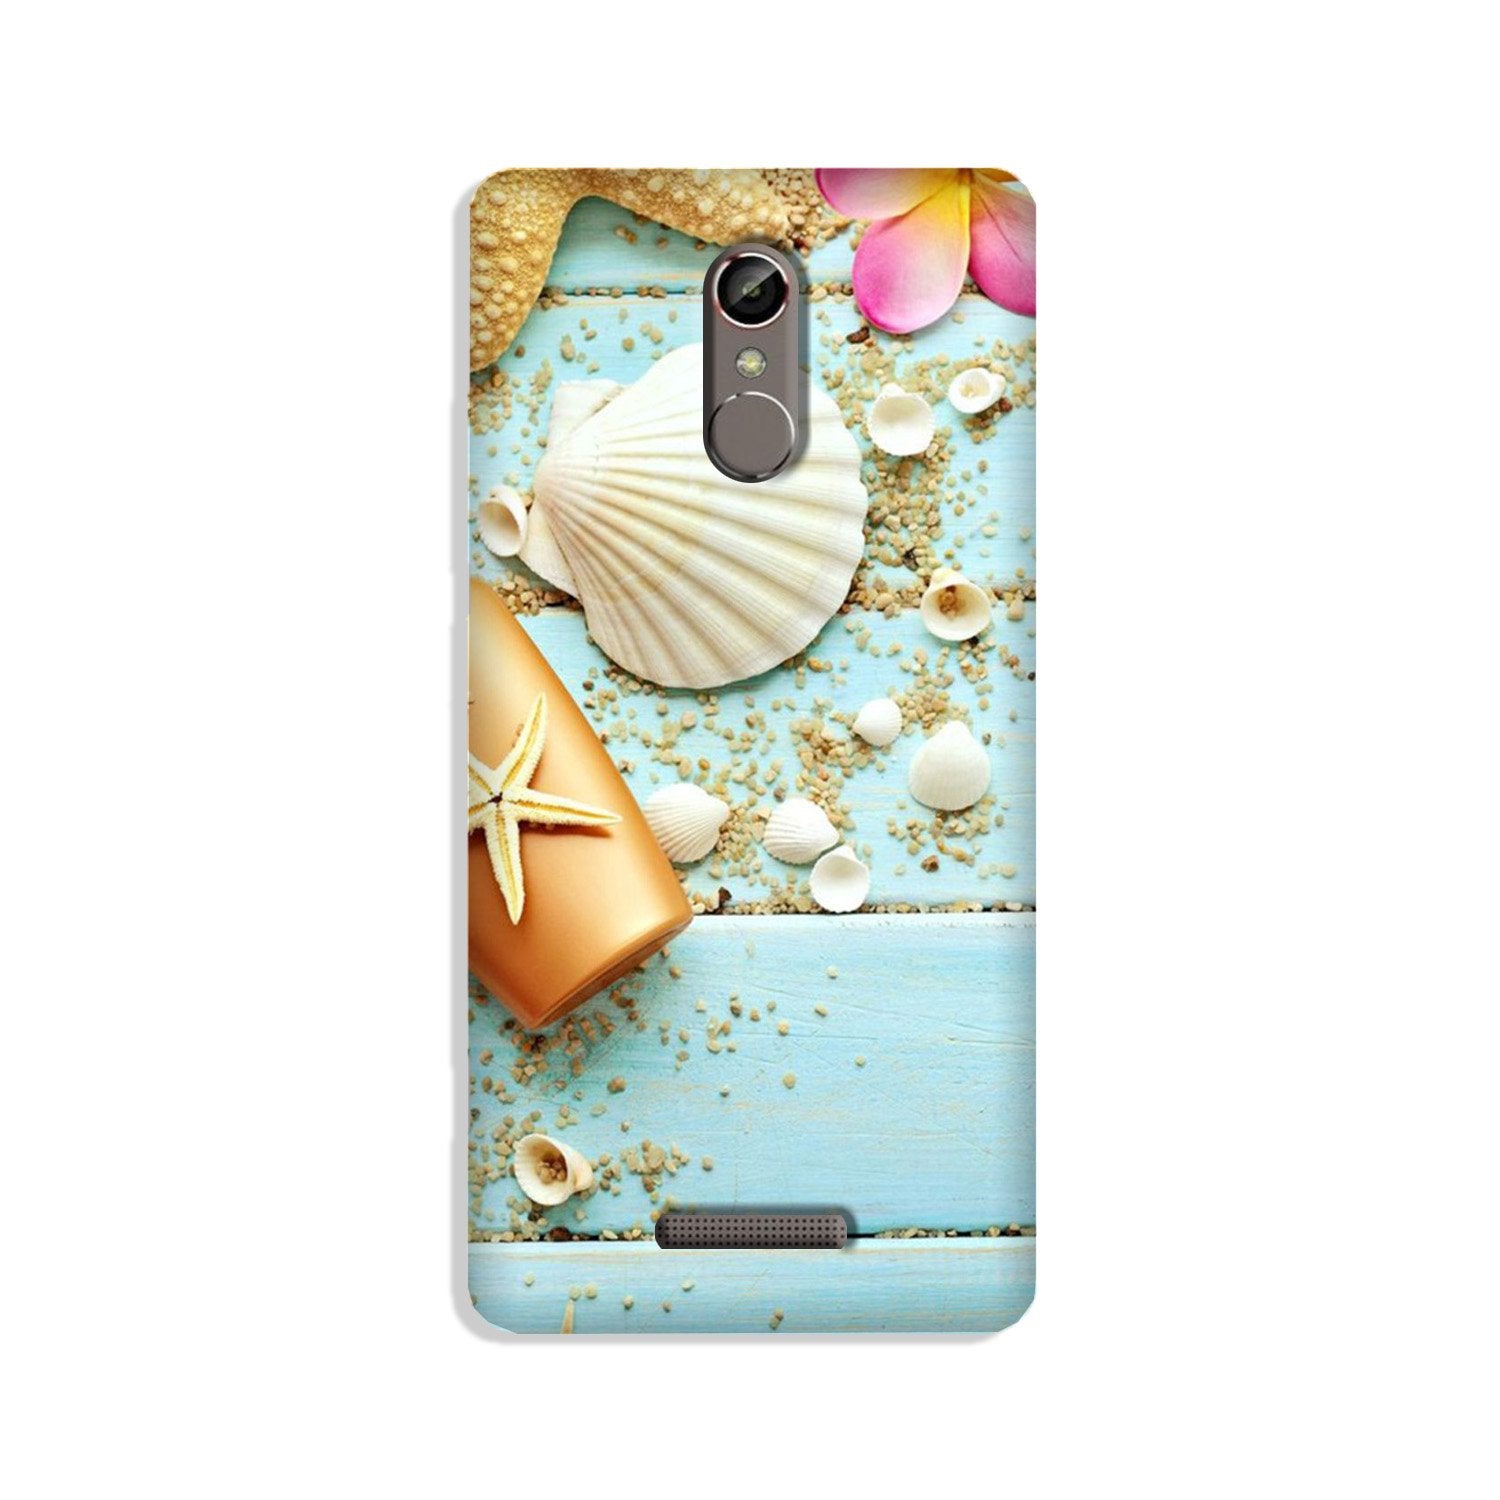 Sea Shells Case for Gionee S6s